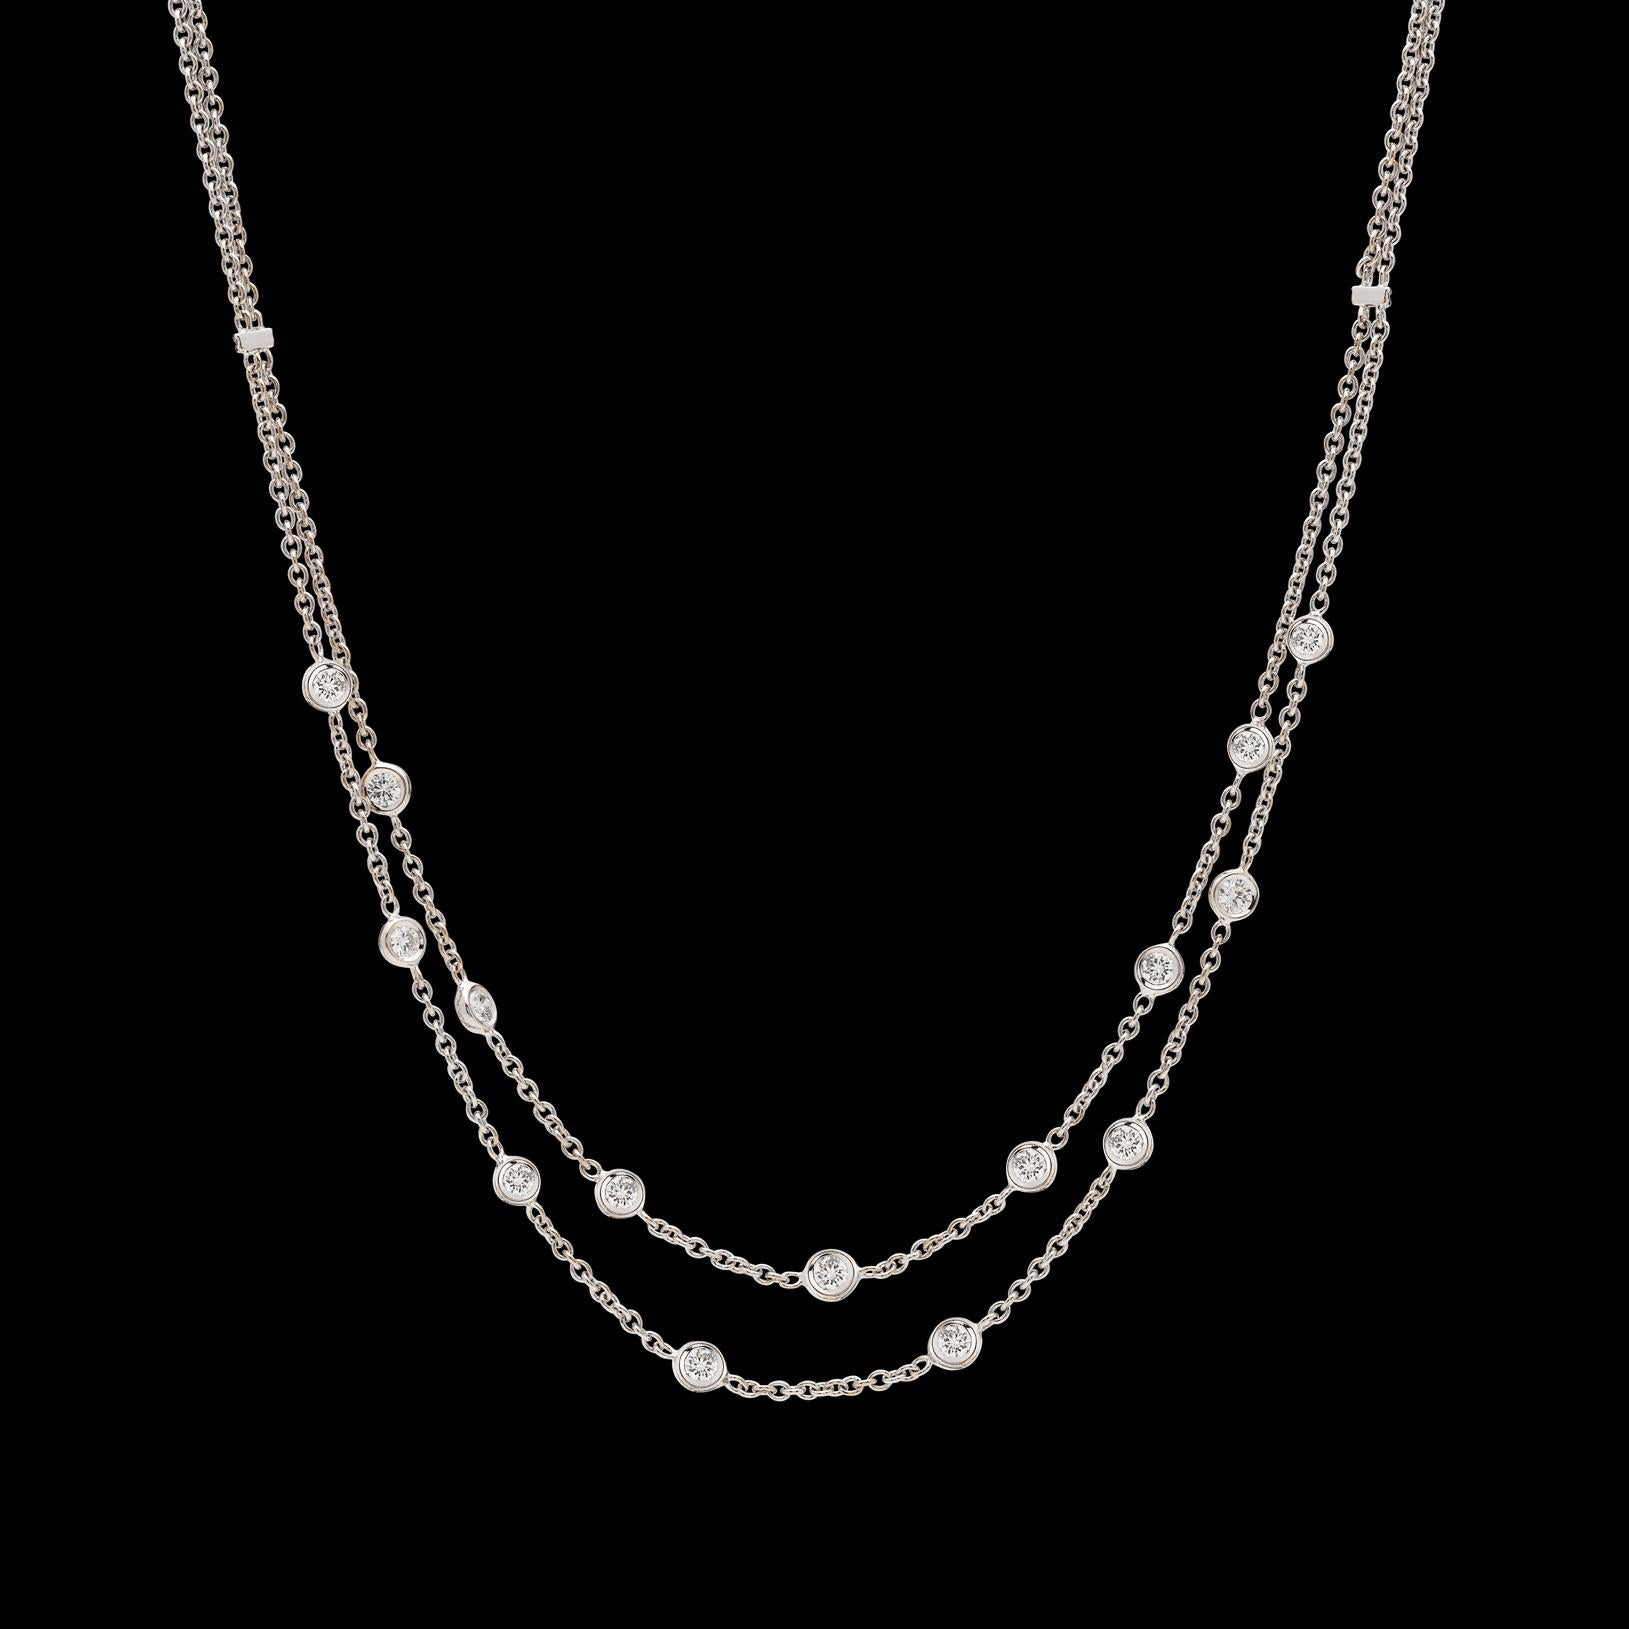 Women's or Men's Diamond and White Gold Swag Necklace